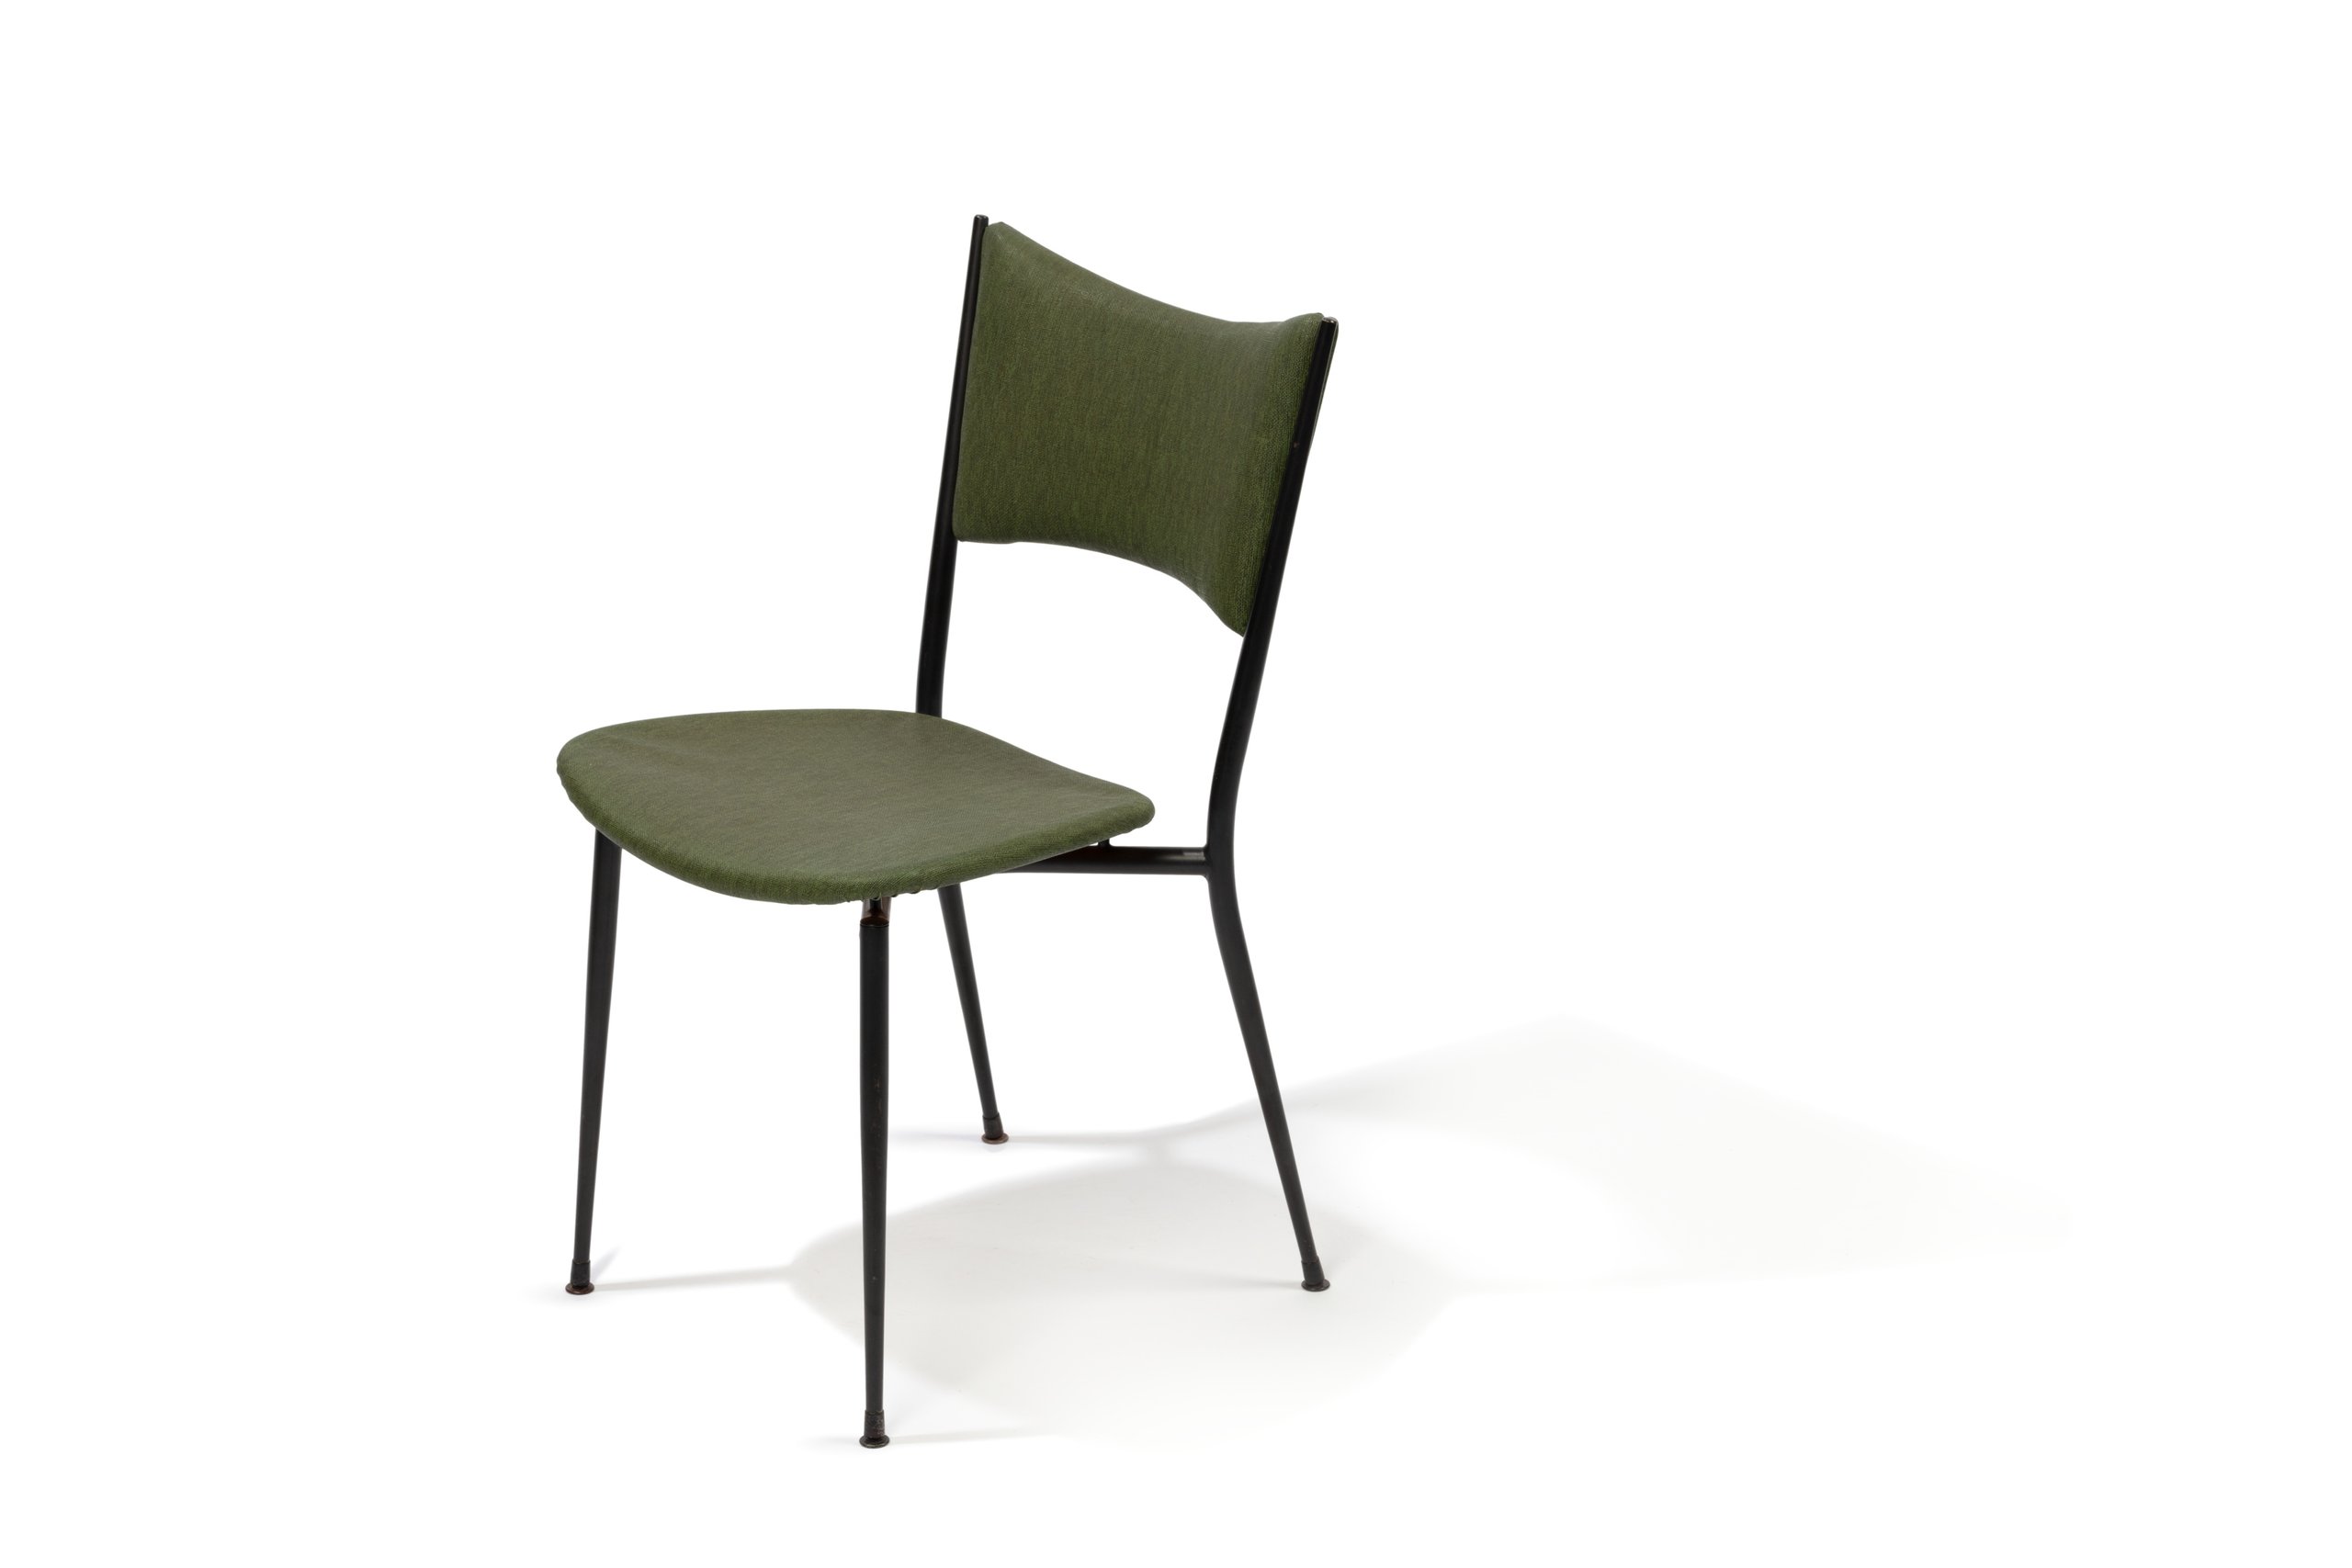 'Mitzi' chair by Grant Featherston